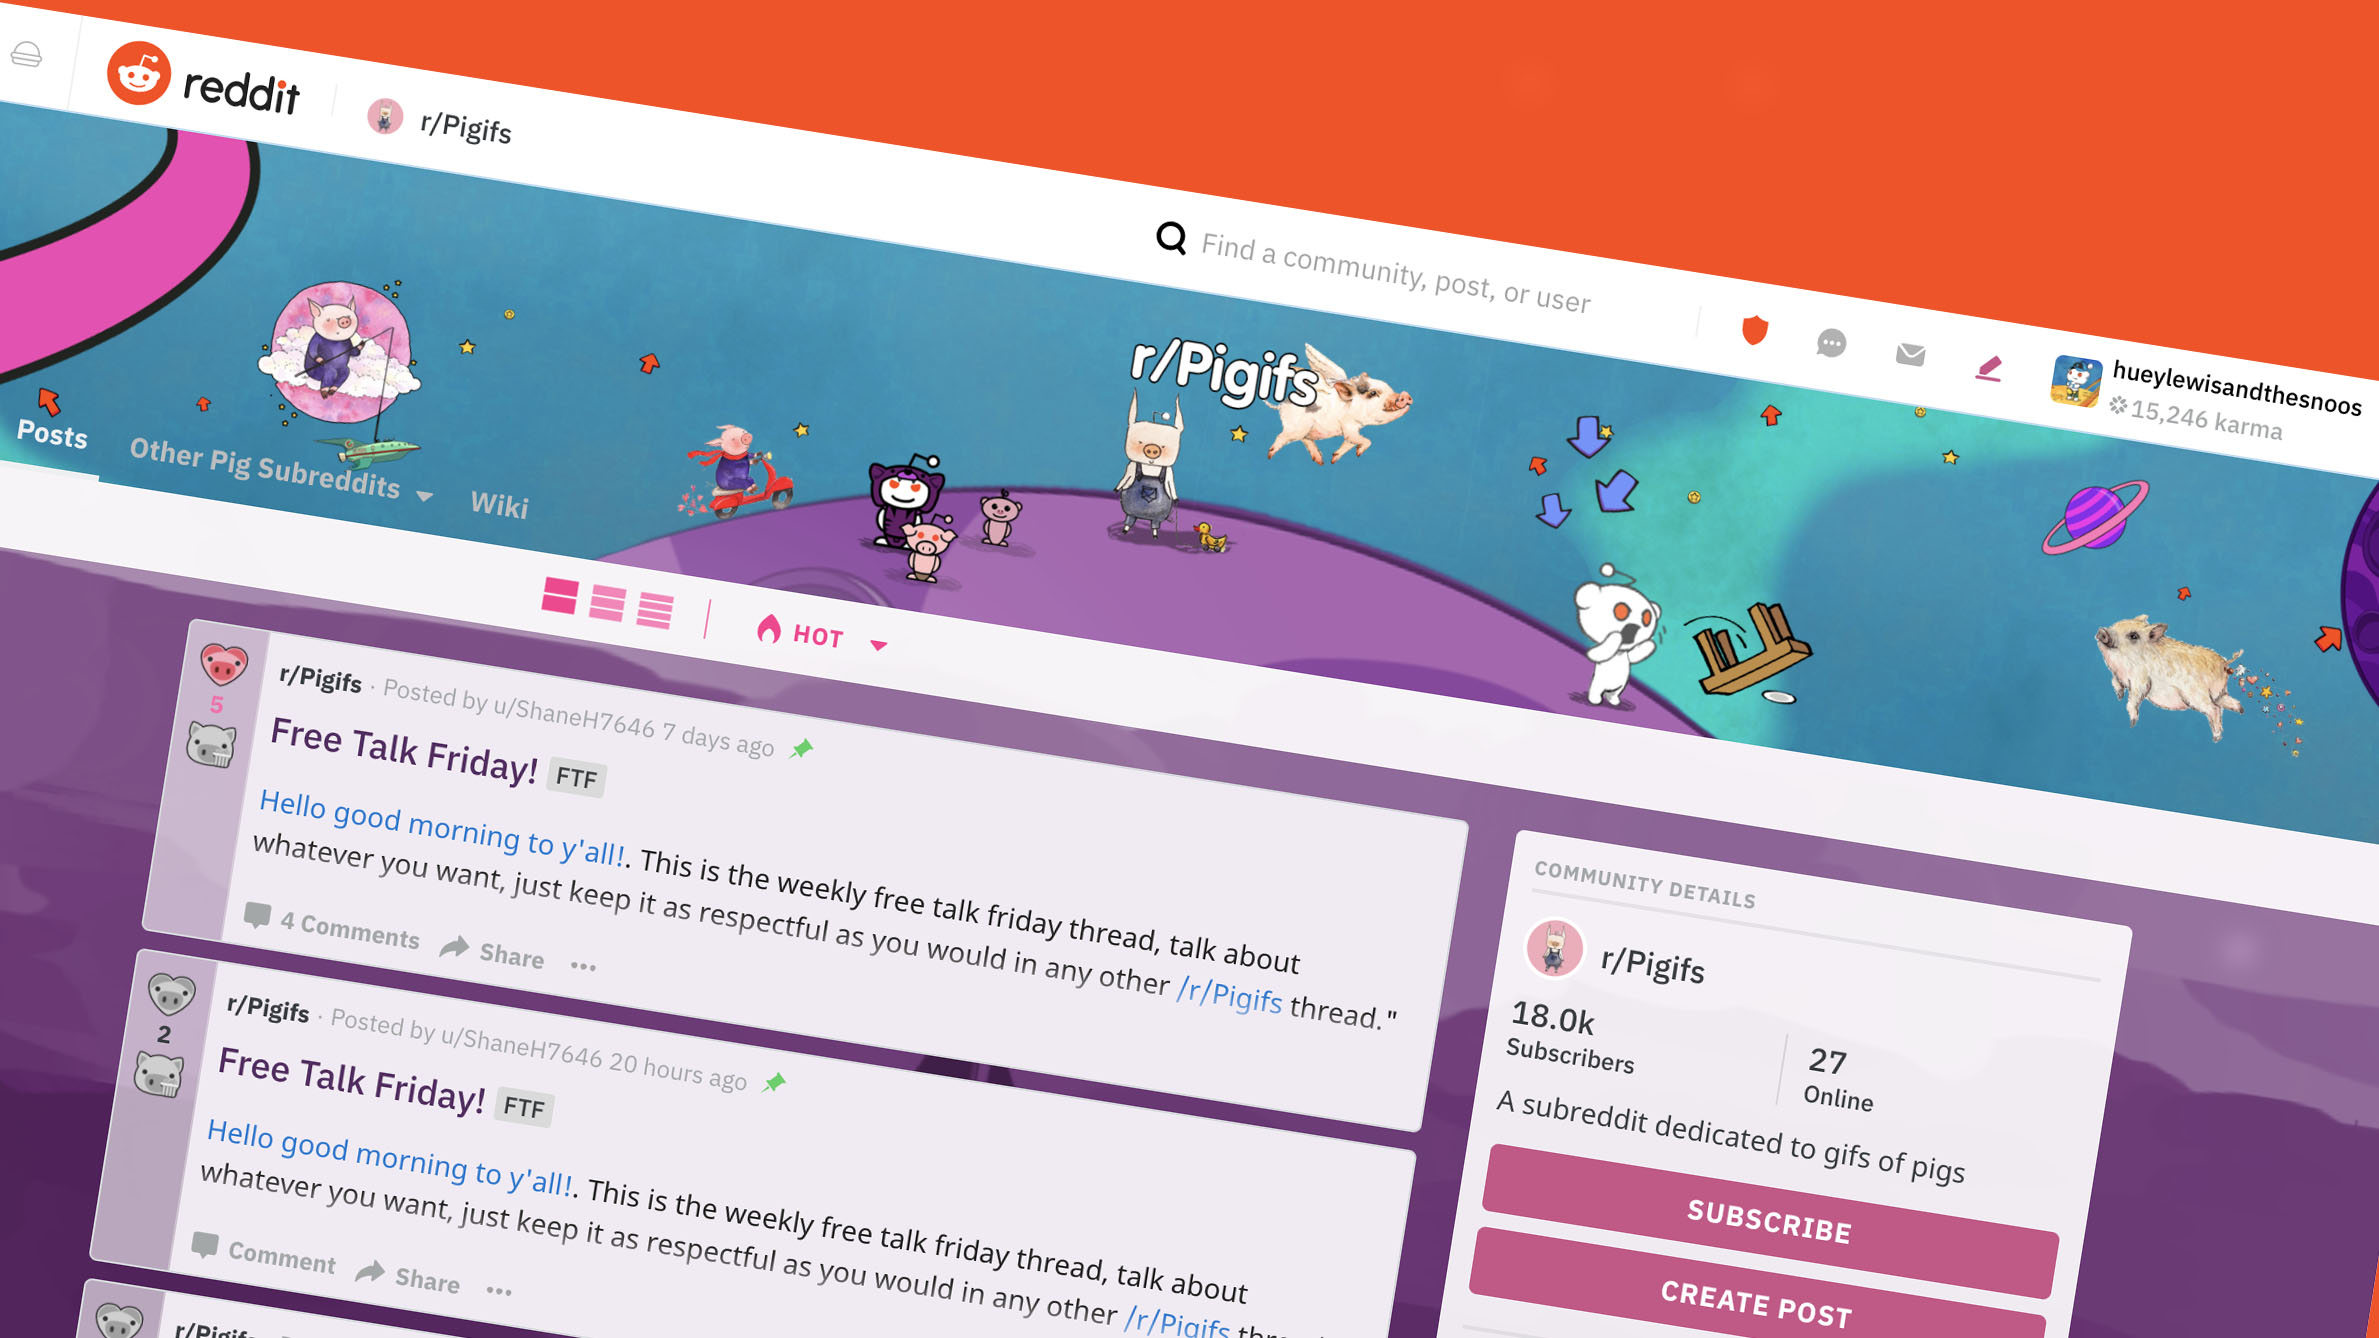 Reddit got hacked, exposing the personal data of select users TechRadar